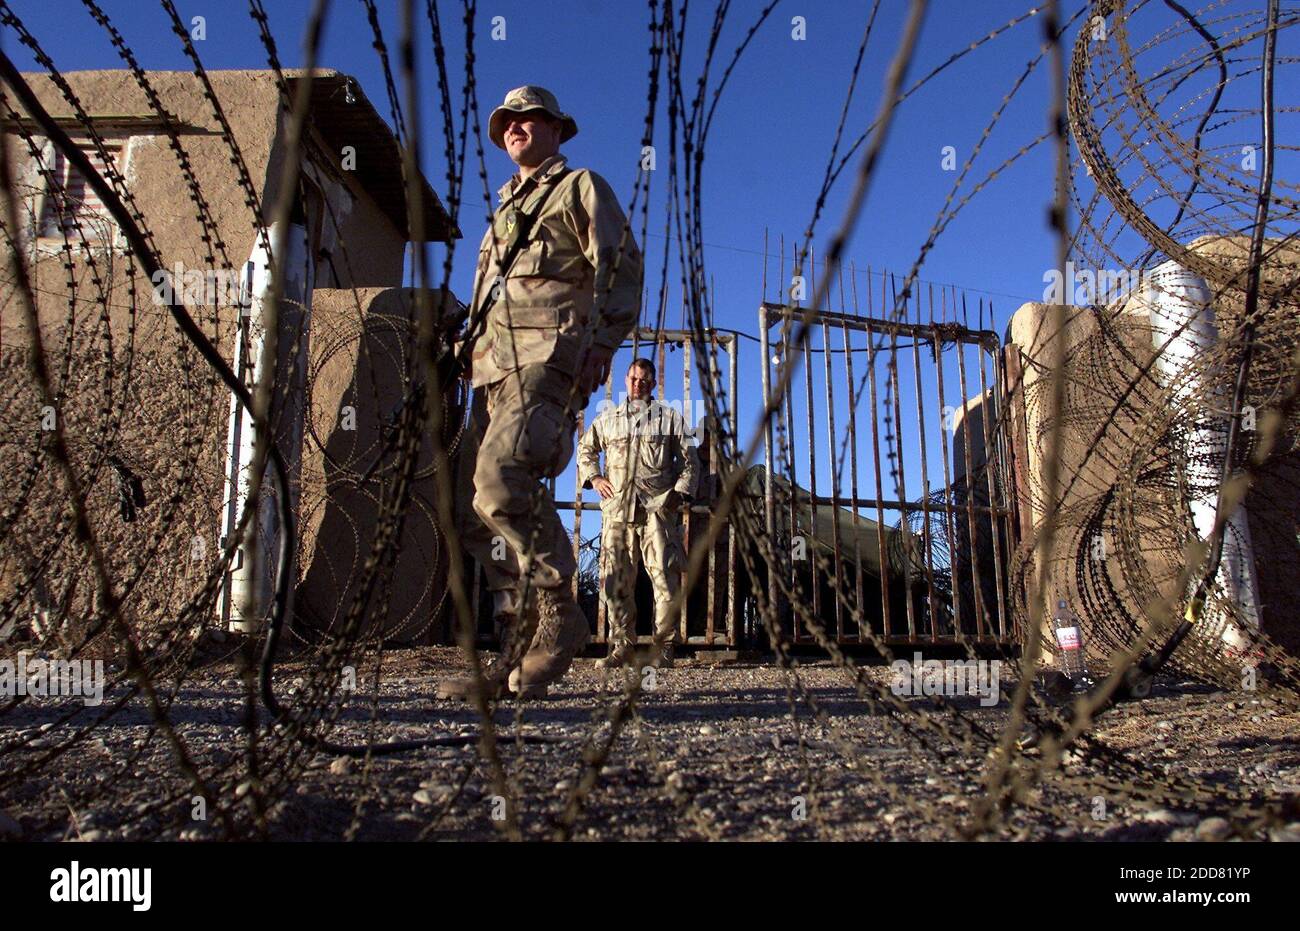 NO FILM, NO VIDEO, NO TV, NO DOCUMENTARY - Members of the 26th Marine Expeditionary unit stand guard at the entrance of the newly constructed battlefield detainee facility at the Kandahar International Airport, in Kandahar, Afghanistan on December 18, 2001. Although the public outcry in the United States and abroad has focused mainly on detainee abuse at the U.S. naval base in Guantanamo Bay, Cuba, and at the Abu Ghraib prison in Iraq, sadistic violence first appeared at Bagram and at a similar U.S. internment camp at Kandahar airfield in southern Afghanistan. Photo by Tom Pennington/Fort Wort Stock Photo